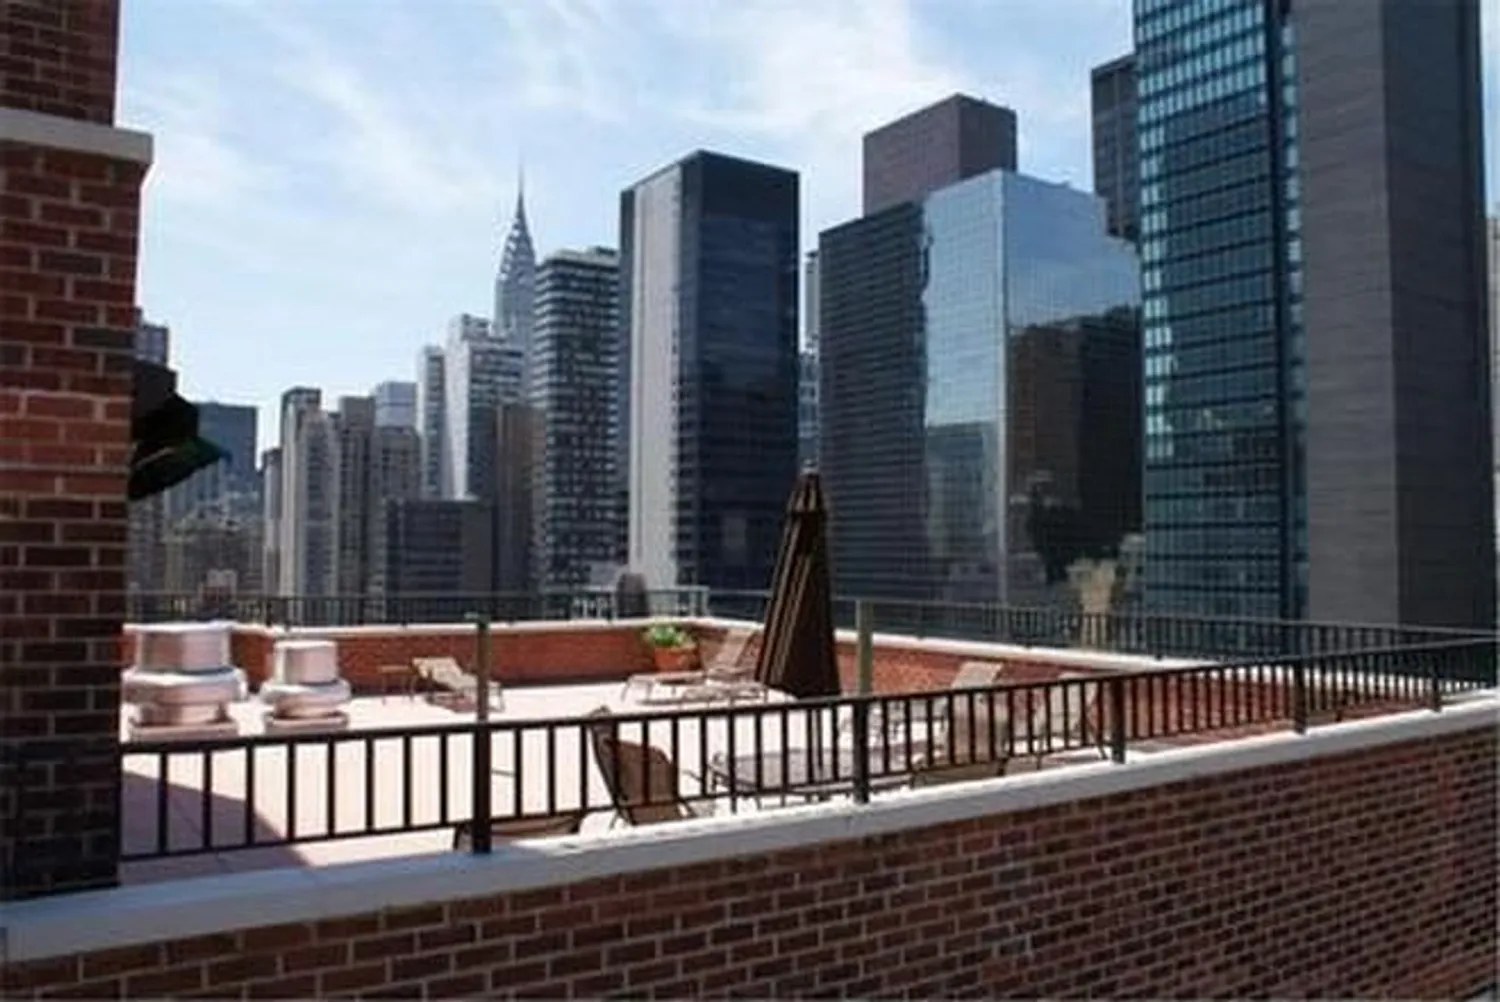 Roofdeck w/ lounge chairs - views of Chrysler Bldg